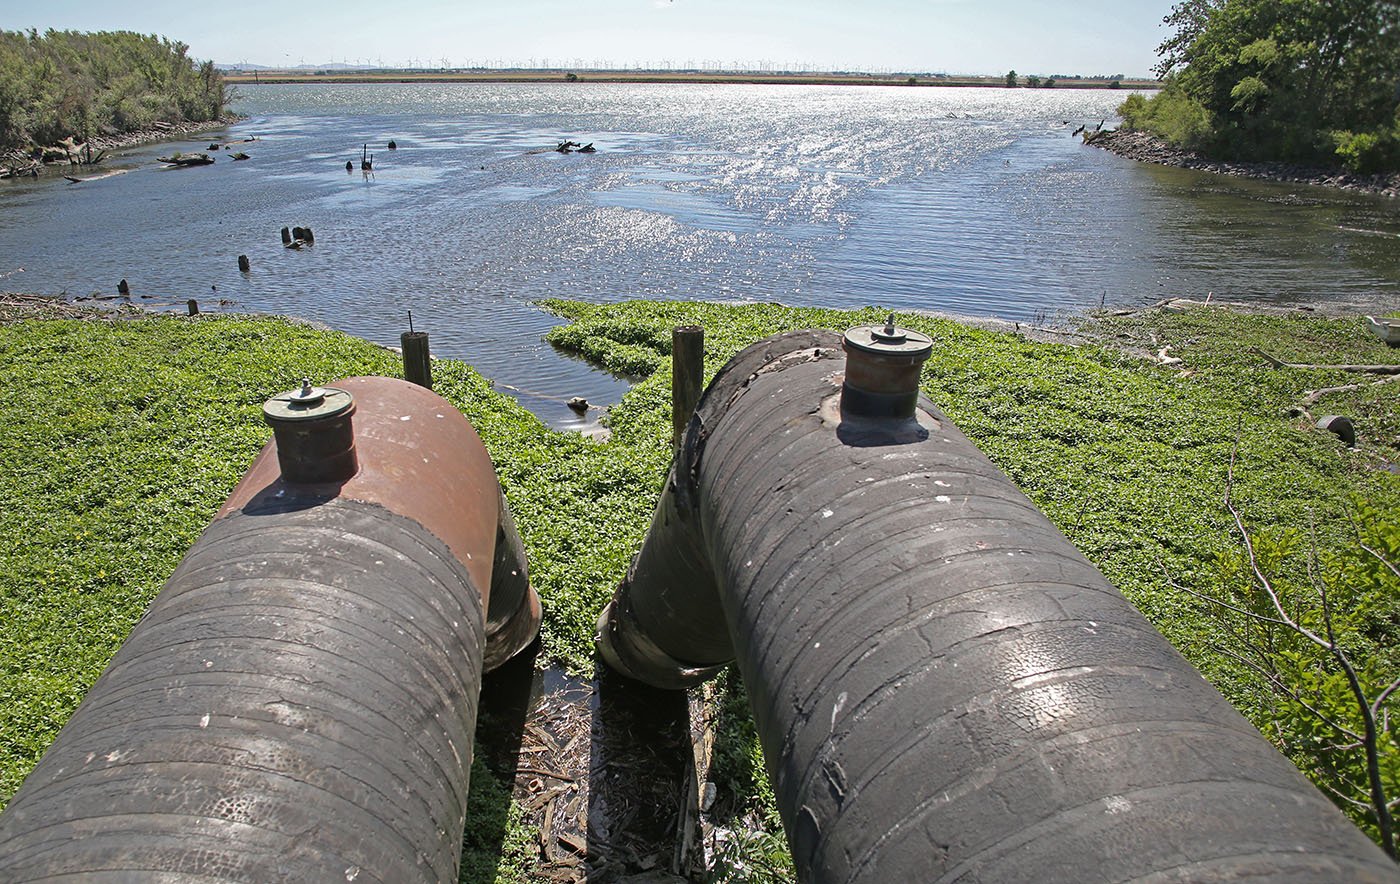  Sacramento-San Joaquin Delta, CA — Large pipes in the Delta and alongside the Sacramento River are a reminder of how much human interference has altered the water’s natural flow. May 13, 2021 Tom Levy/The Spiritual Edge  